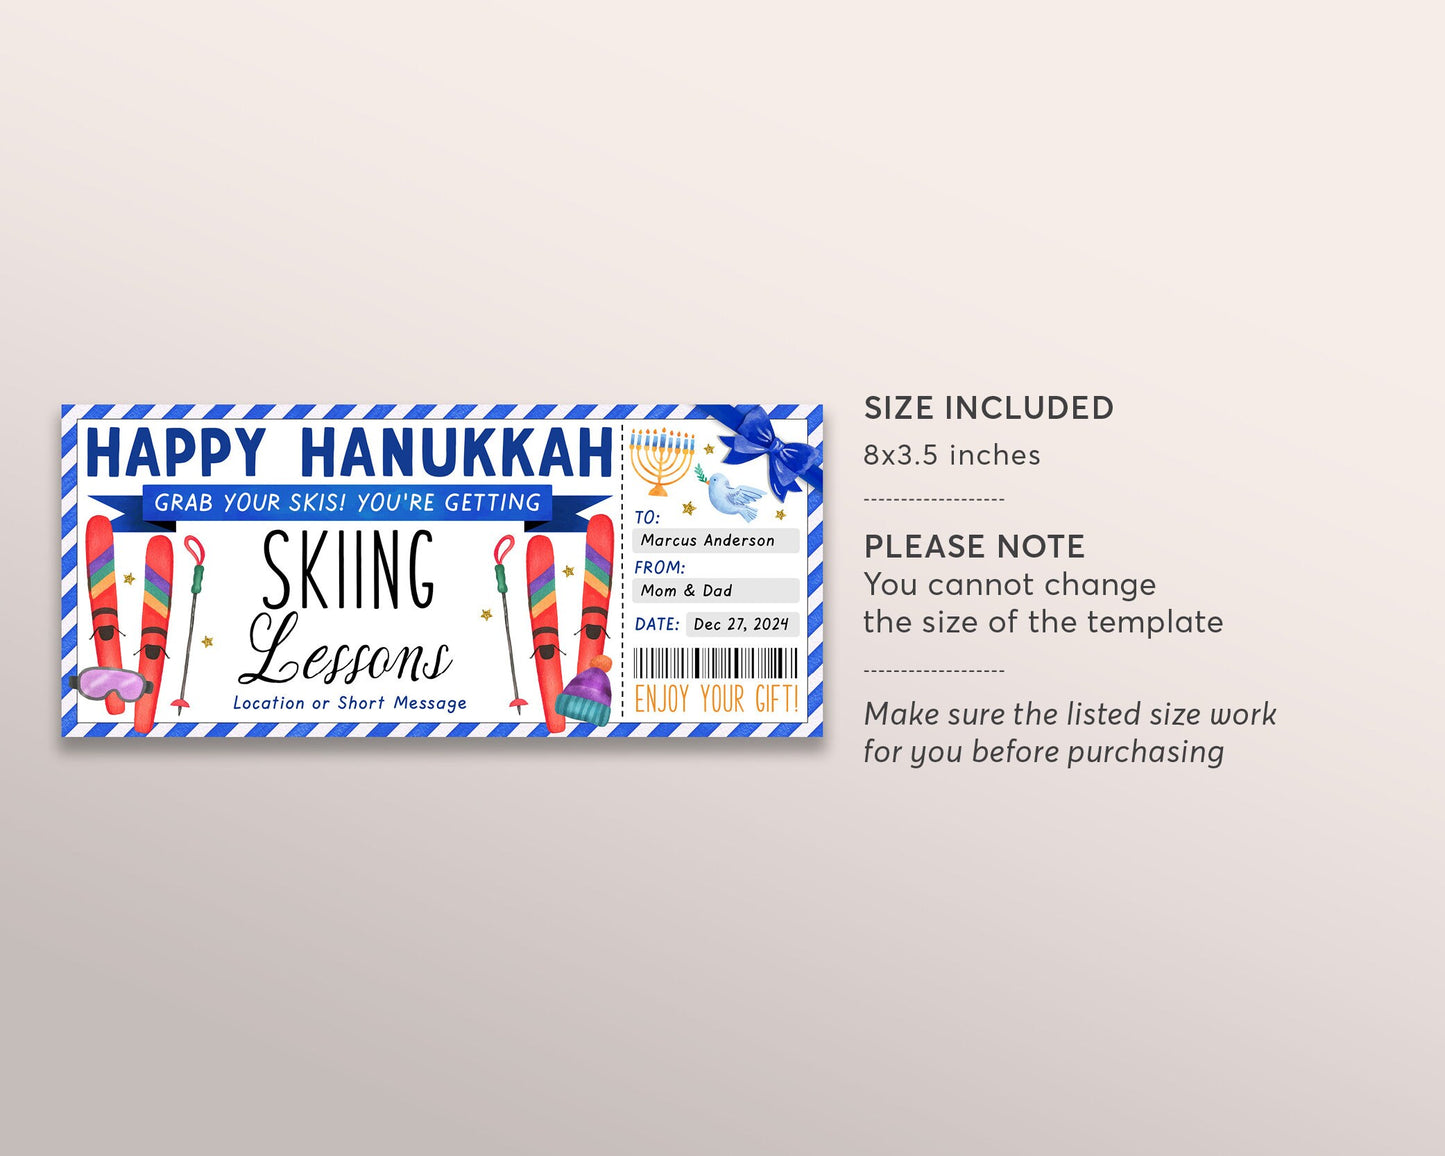 Hanukkah Skiing Lessons Voucher Gift Voucher Editable Template, Surprise Chanukah Ski Training Gift Certificate, Skiing Trip Vacation Coupon